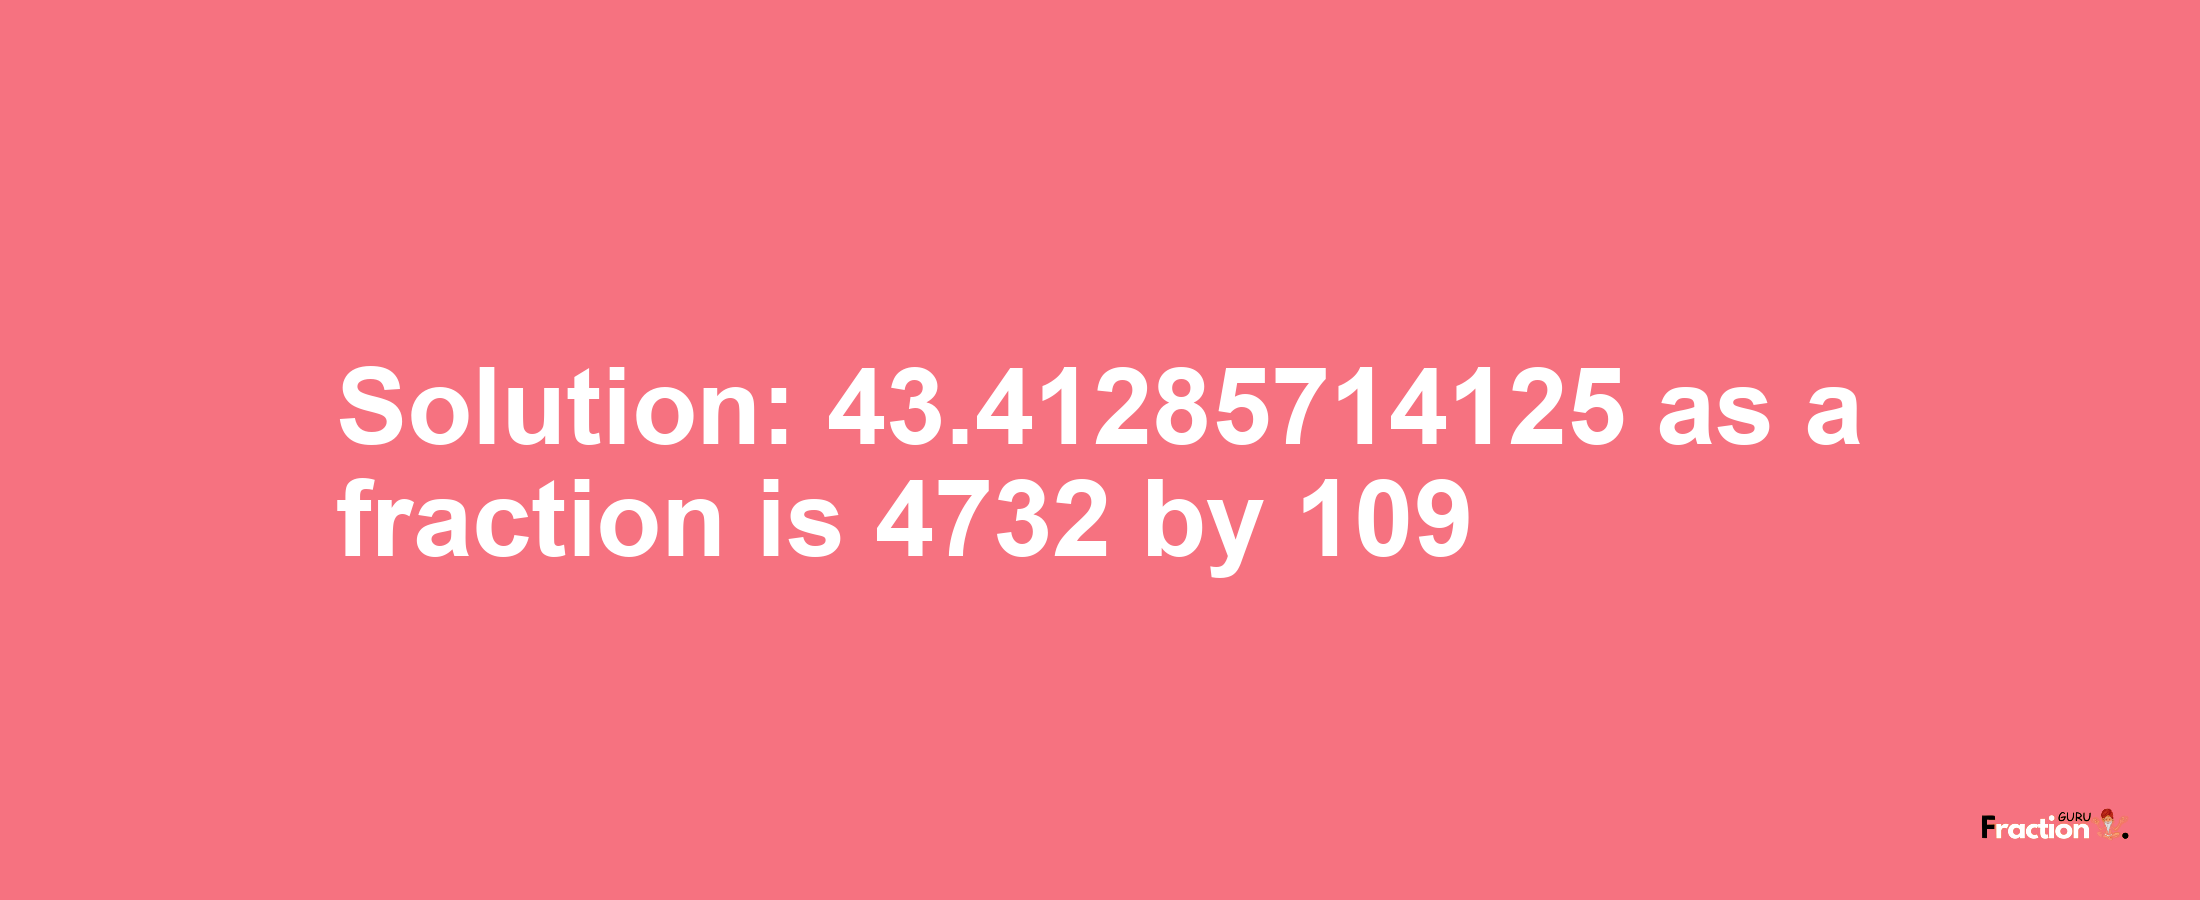 Solution:43.41285714125 as a fraction is 4732/109